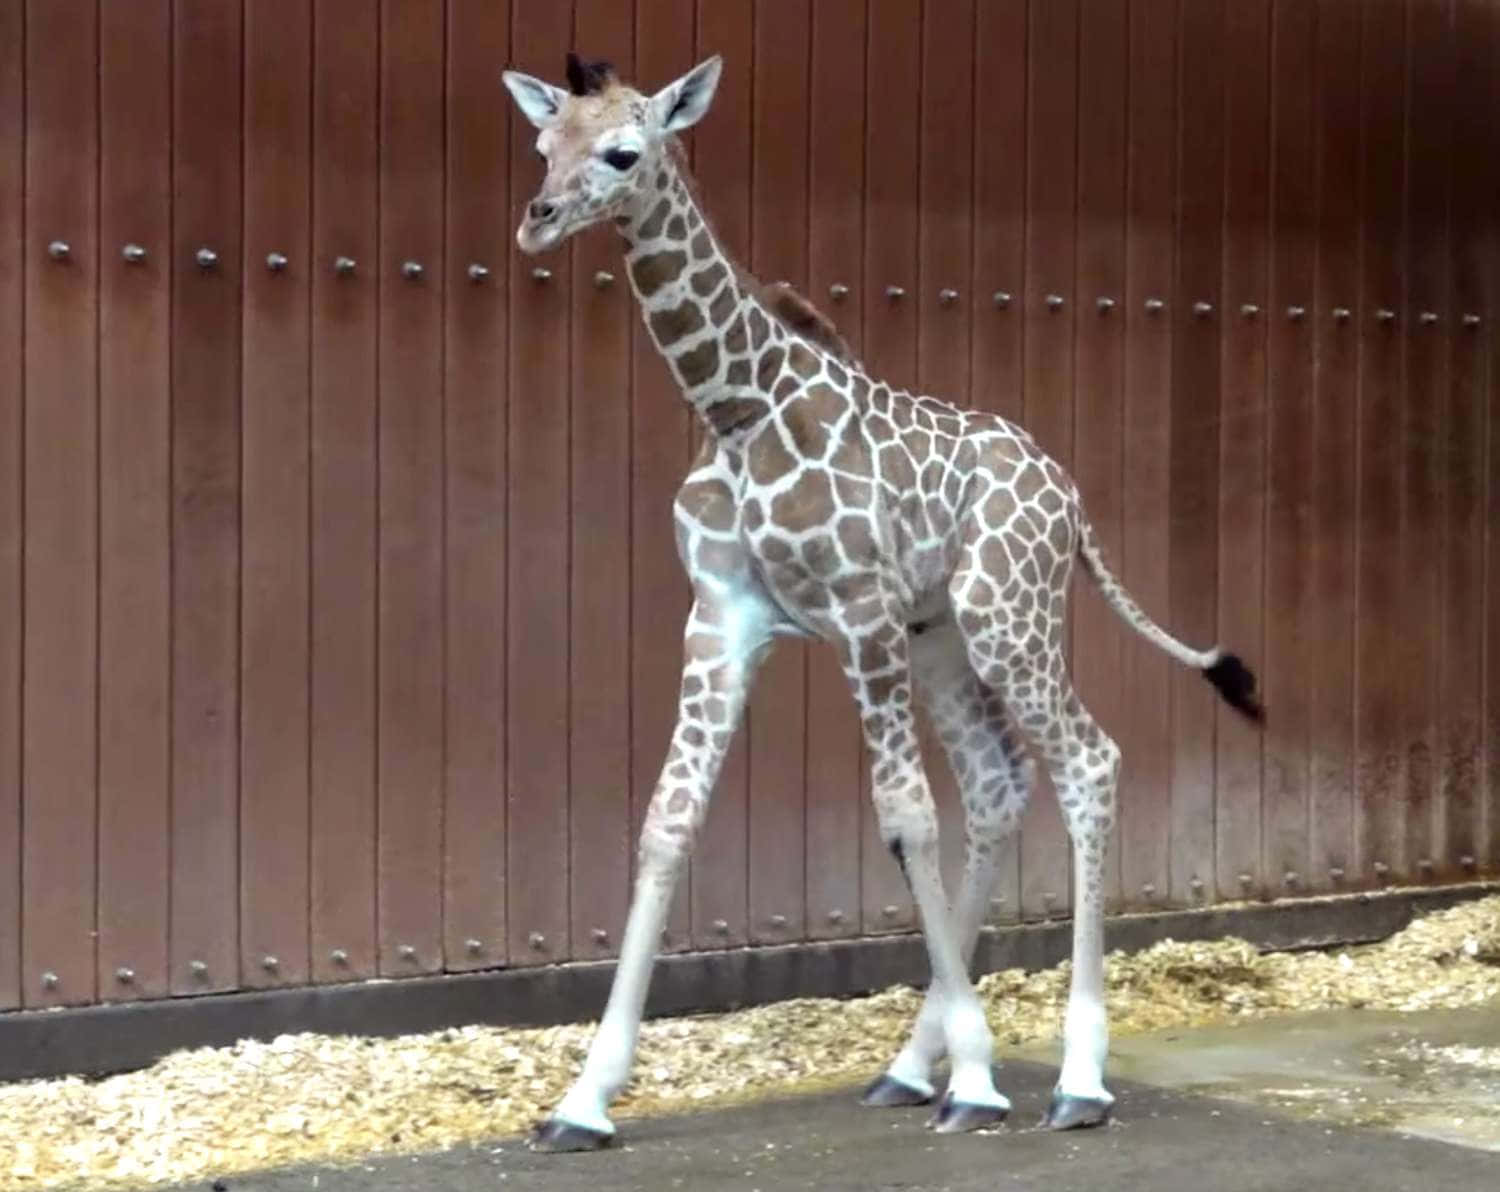 Adorable baby giraffe searching for its mother